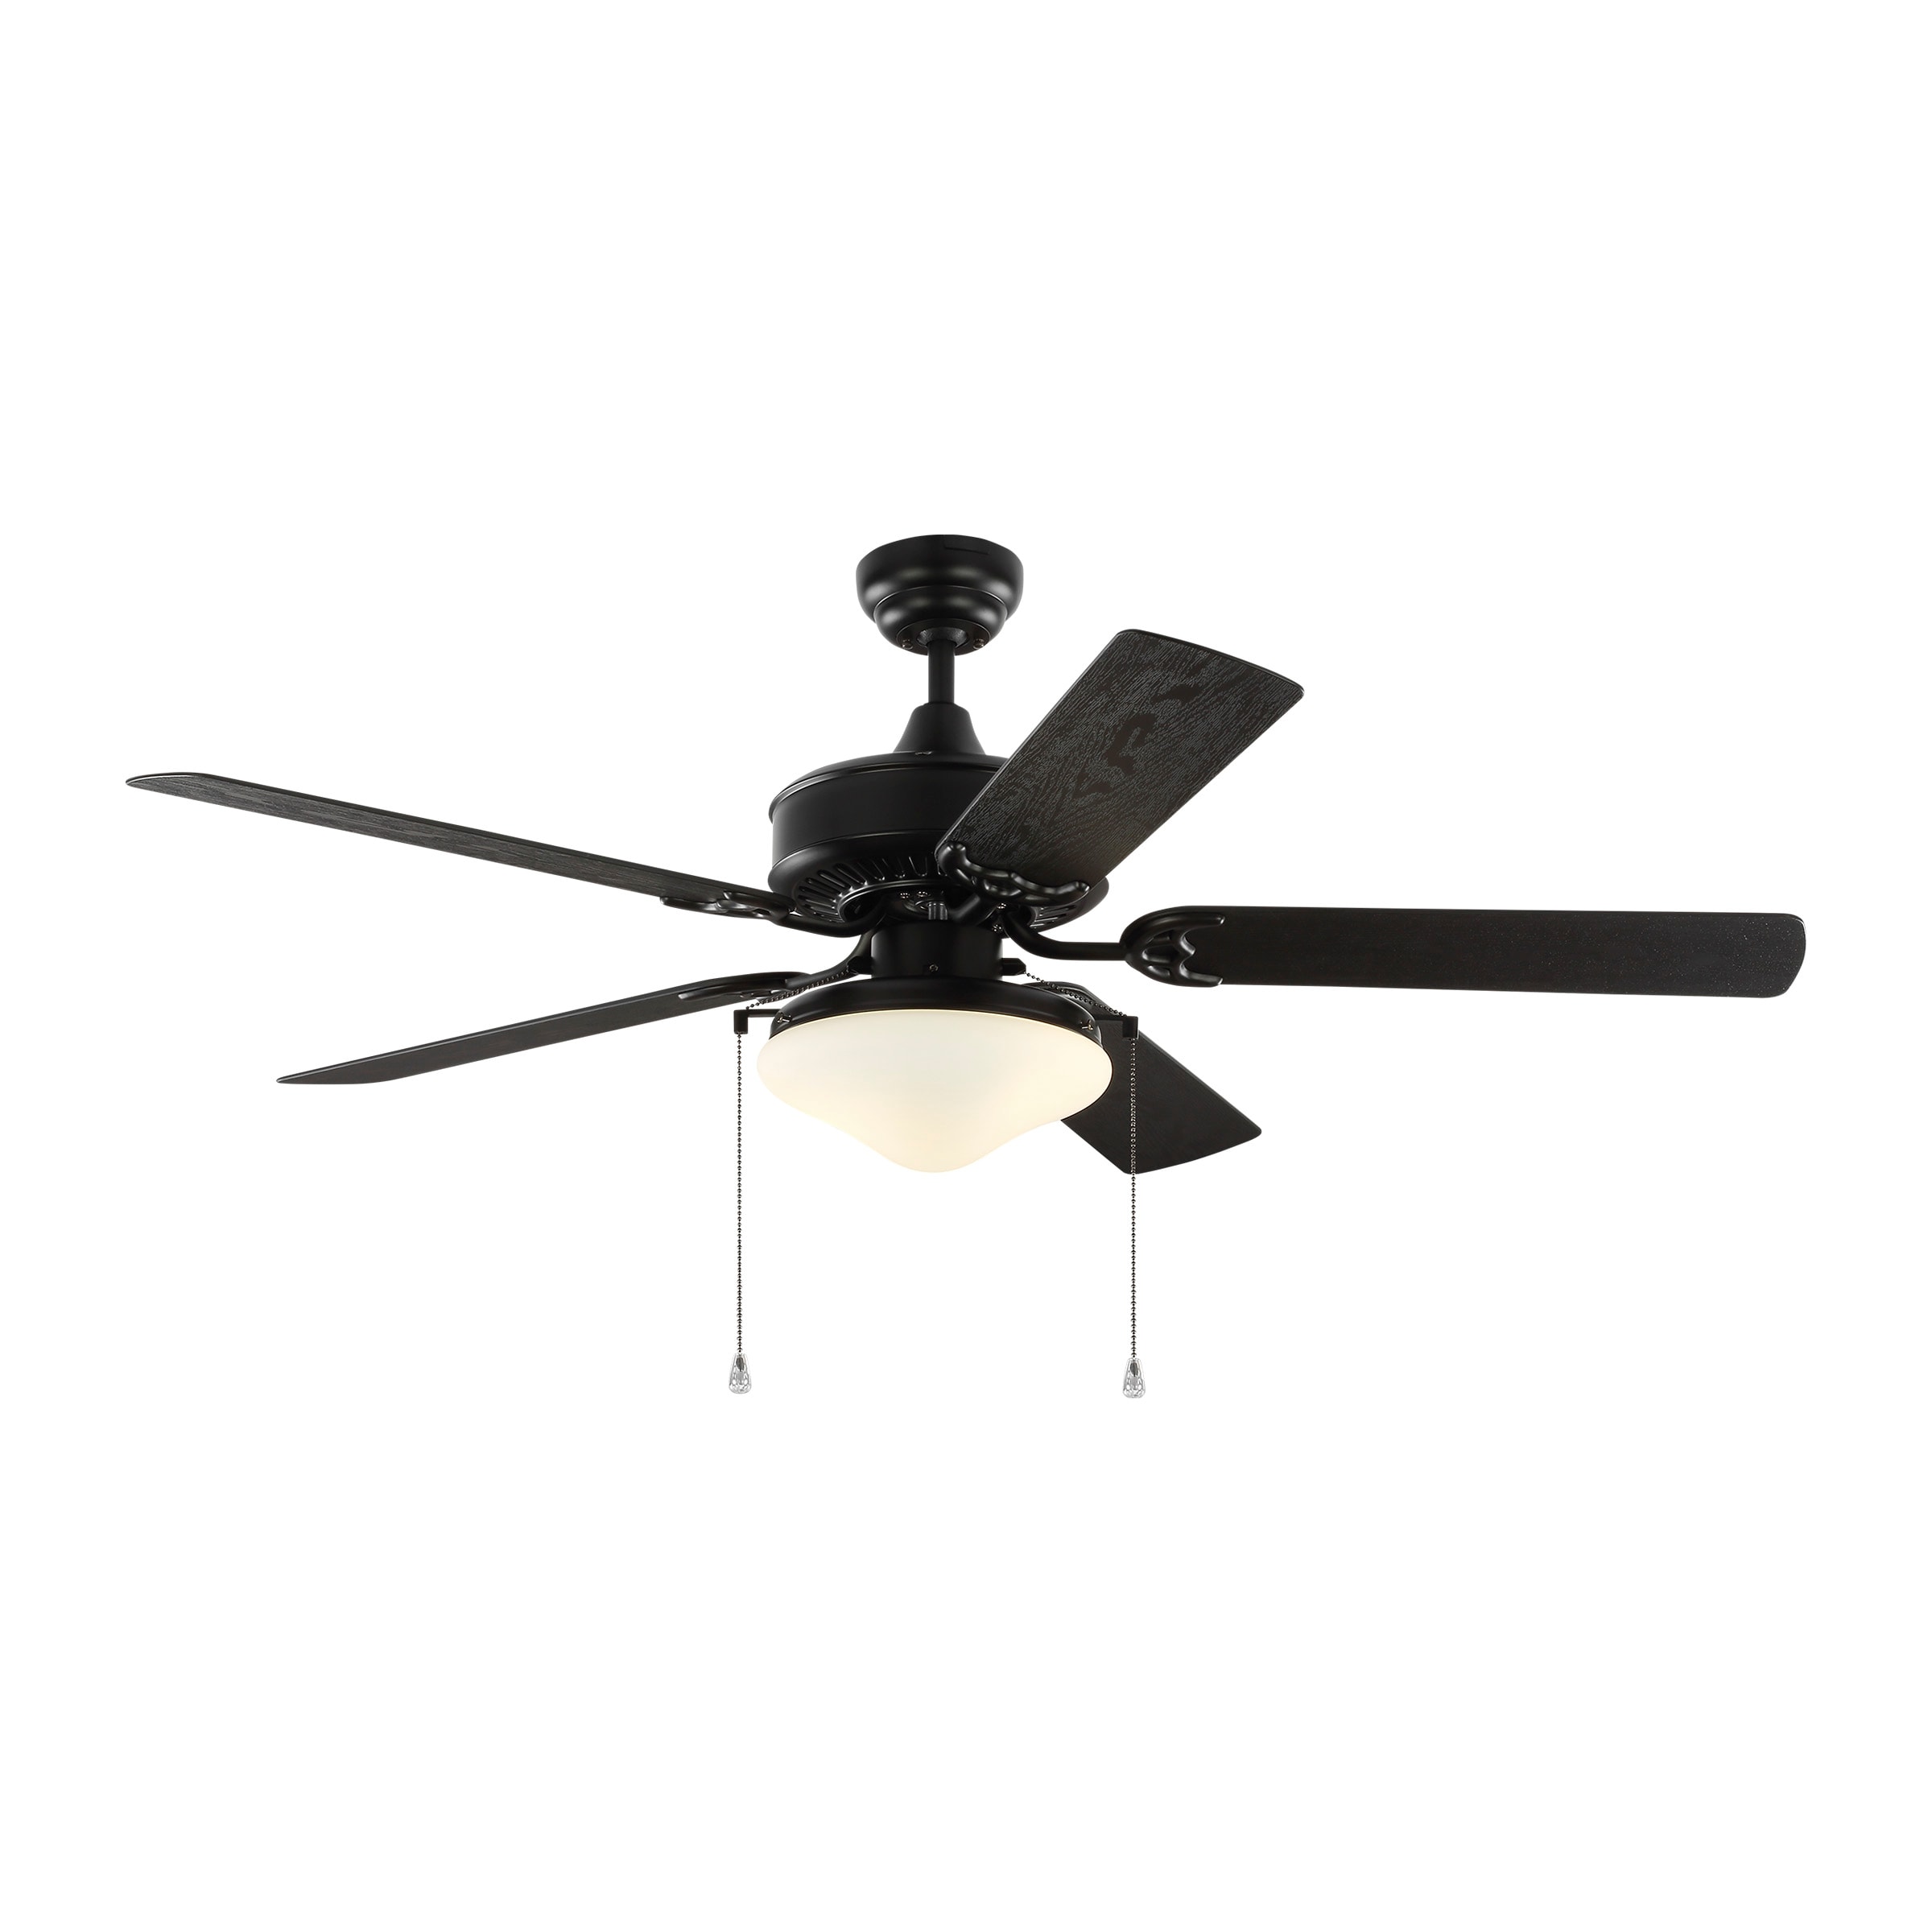 Monte Carlo 5hvo52bkd Matte Black Haven, White Exterior Ceiling Fan With Light